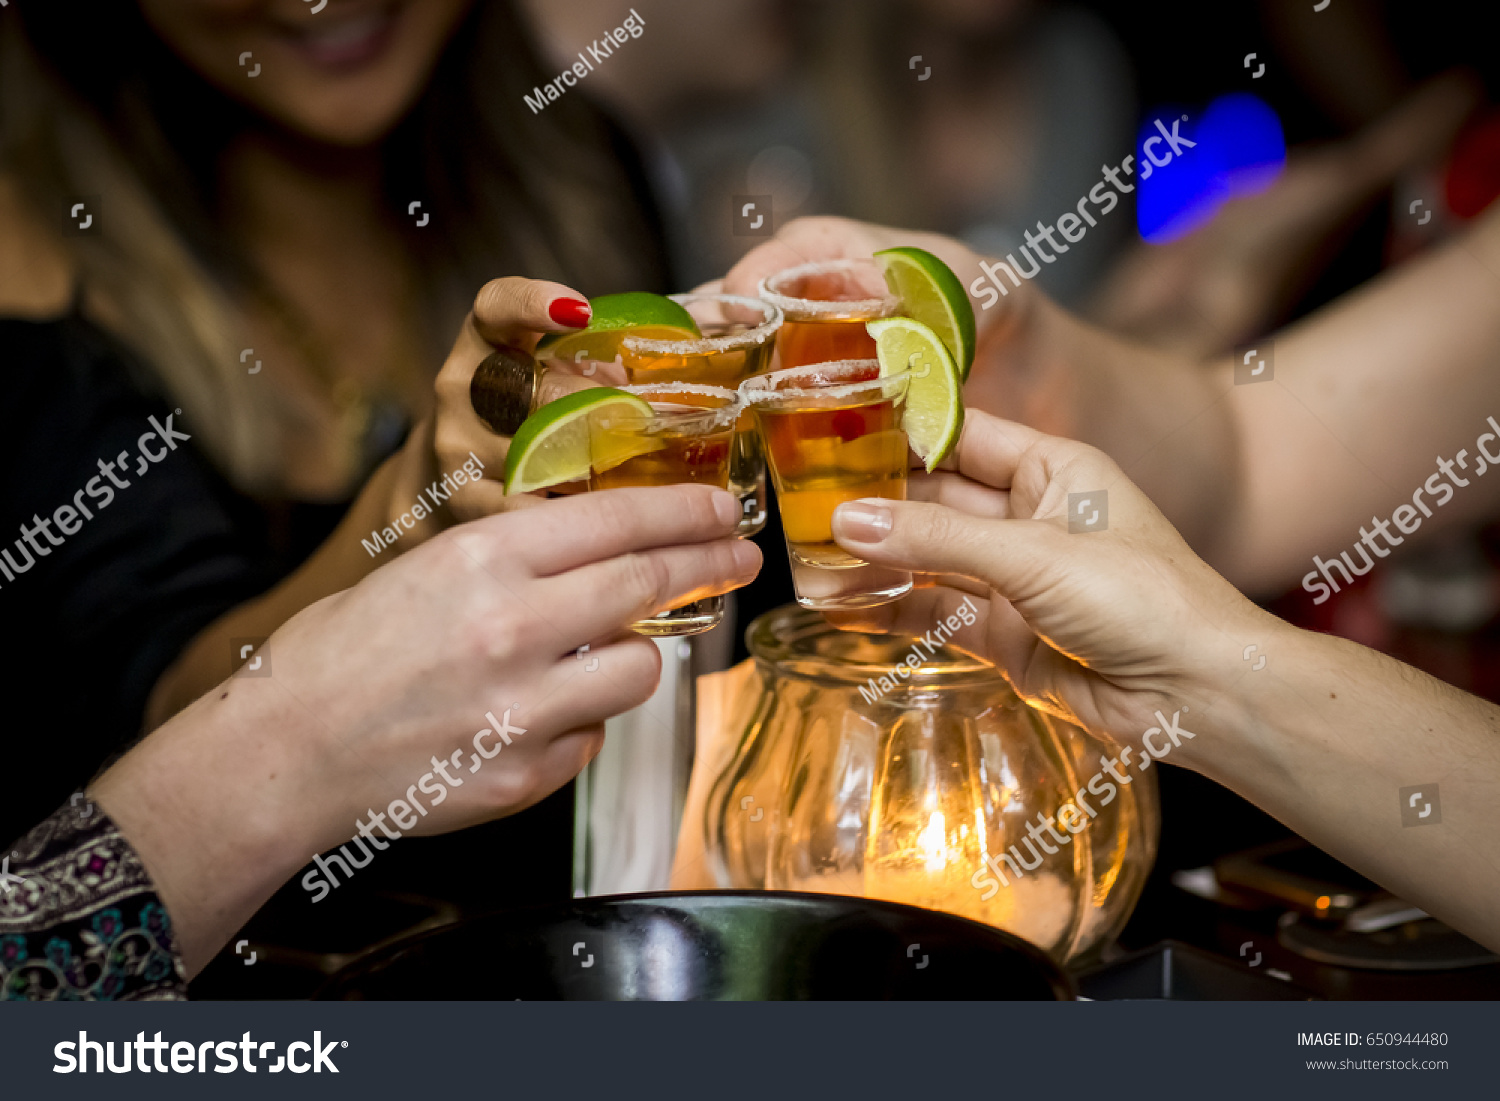 Girls making a toast with tequila shots #650944480